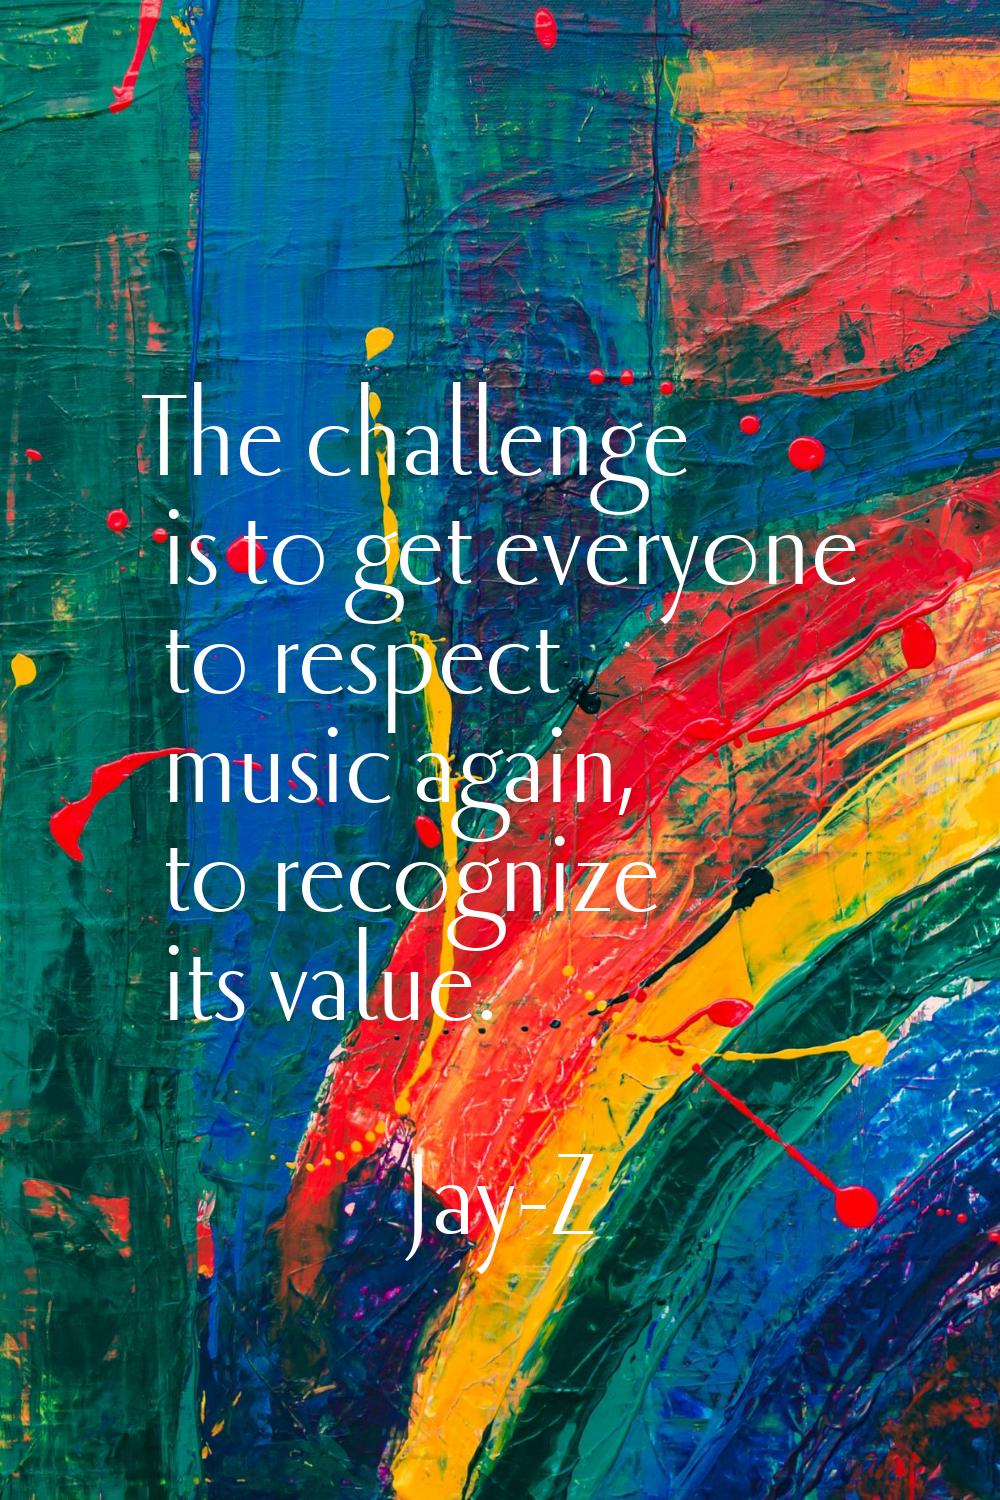 The challenge is to get everyone to respect music again, to recognize its value.